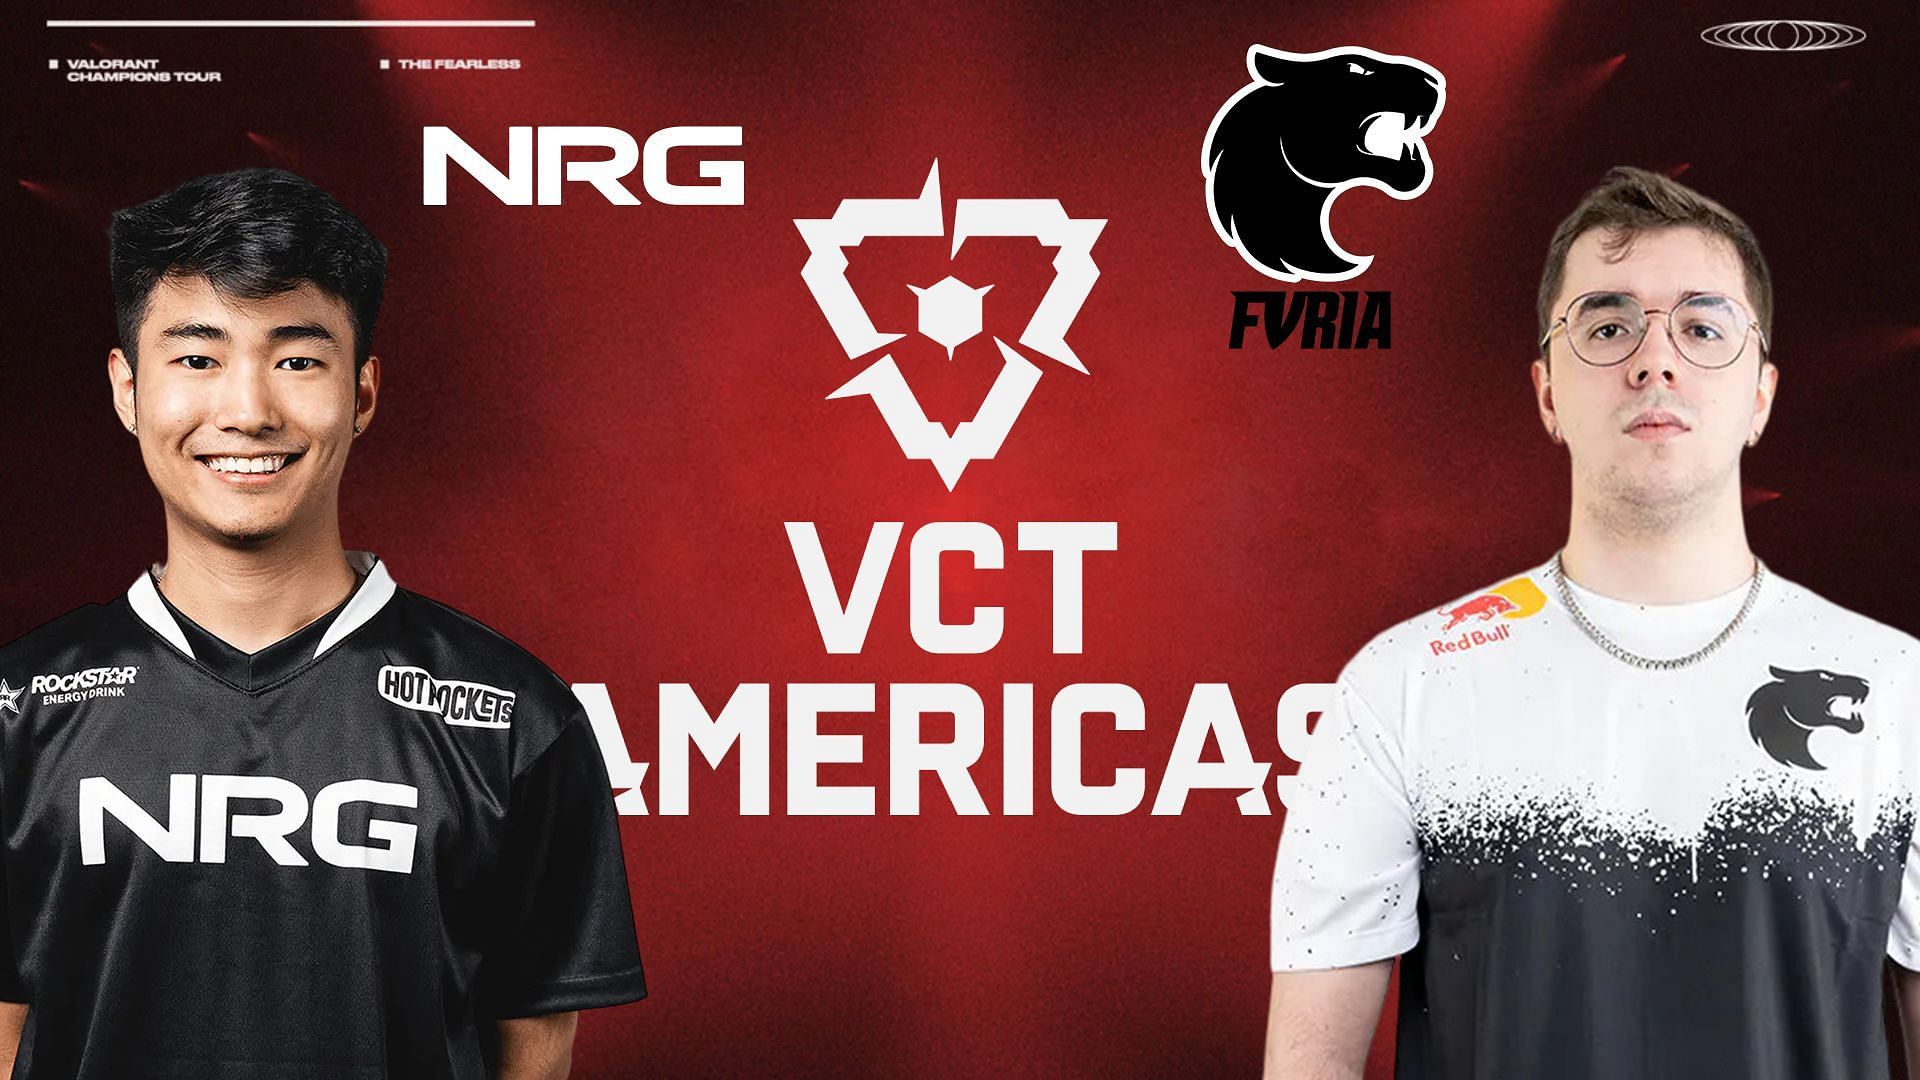 FURIA Esports vs NRG face off to survive in the bracket stage (Image via Sportskeeda)